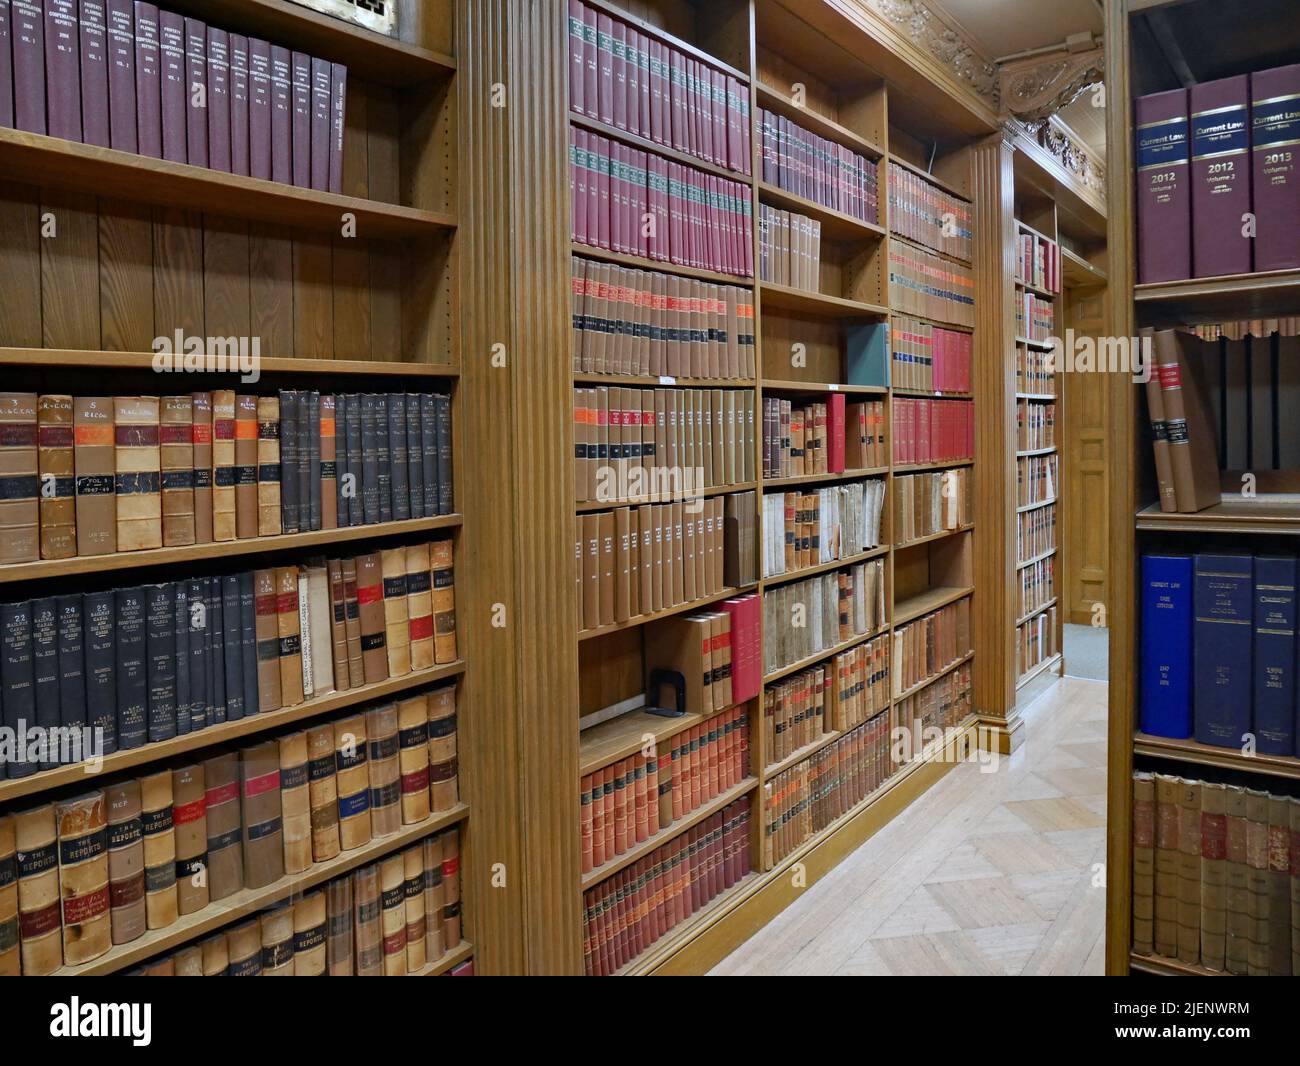 Library with wooden book shelves and bound sets of old legal texts Stock Photo